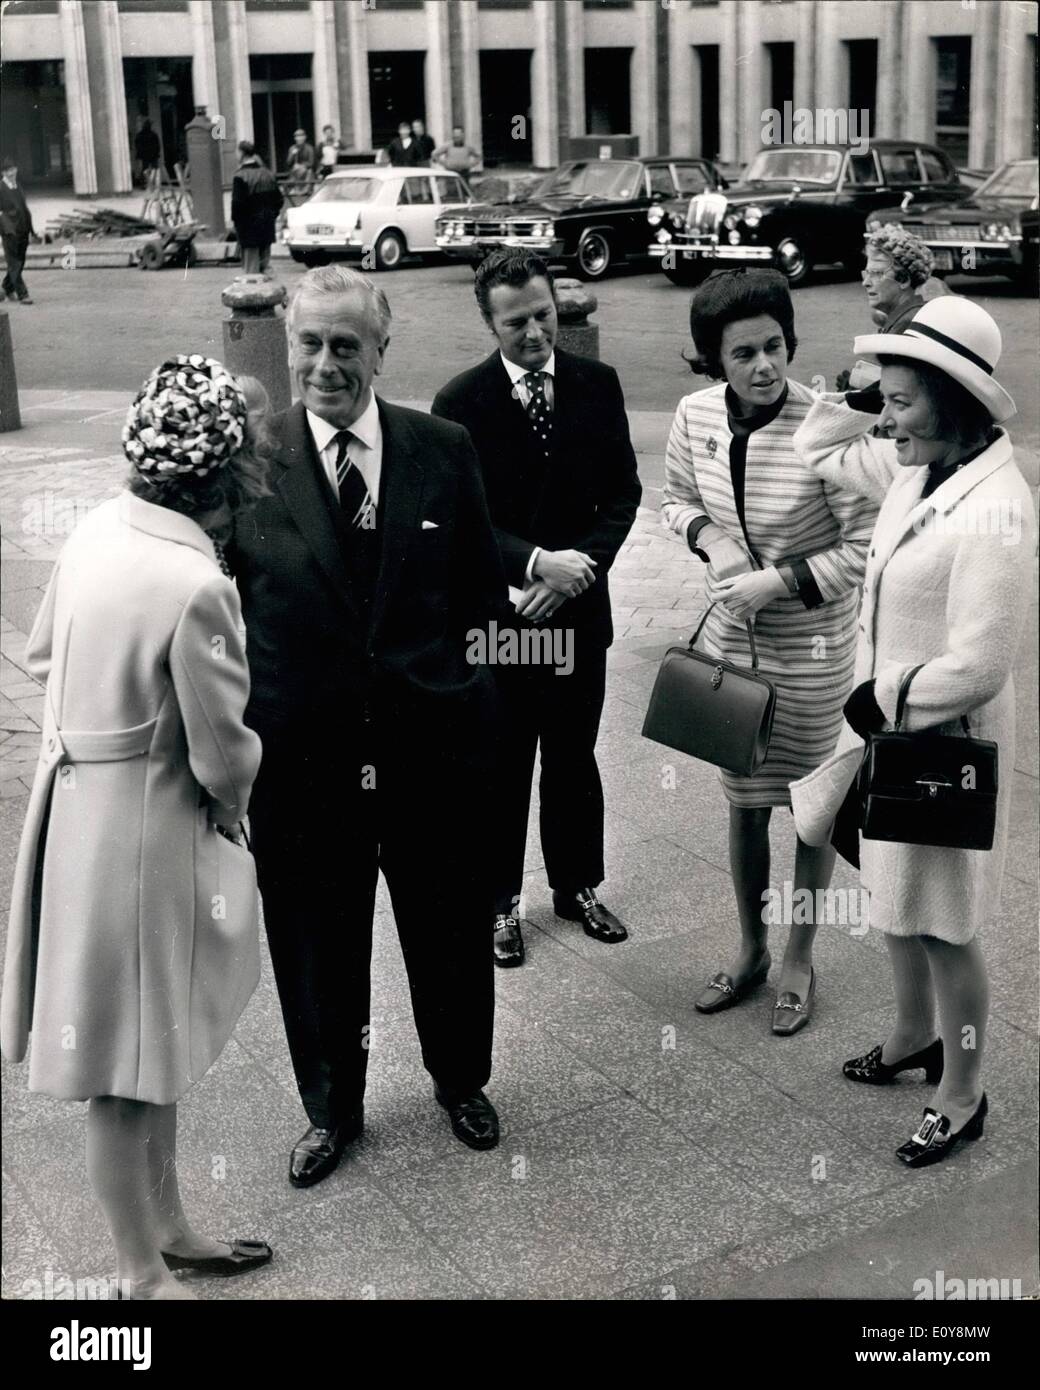 May 05, 1969 - Save The Children Fund Jubilee Thanksgiving Service: The save the Children Thanksgiving Service was held today at St. Paul's Cathedral. Photo Shows Lord Louis Mountbatten a friend, on left, at St. Paul's today - with (L to R): Mr. David Hicks; Lady Brabourne and Lady Pamela Hicks. Stock Photo